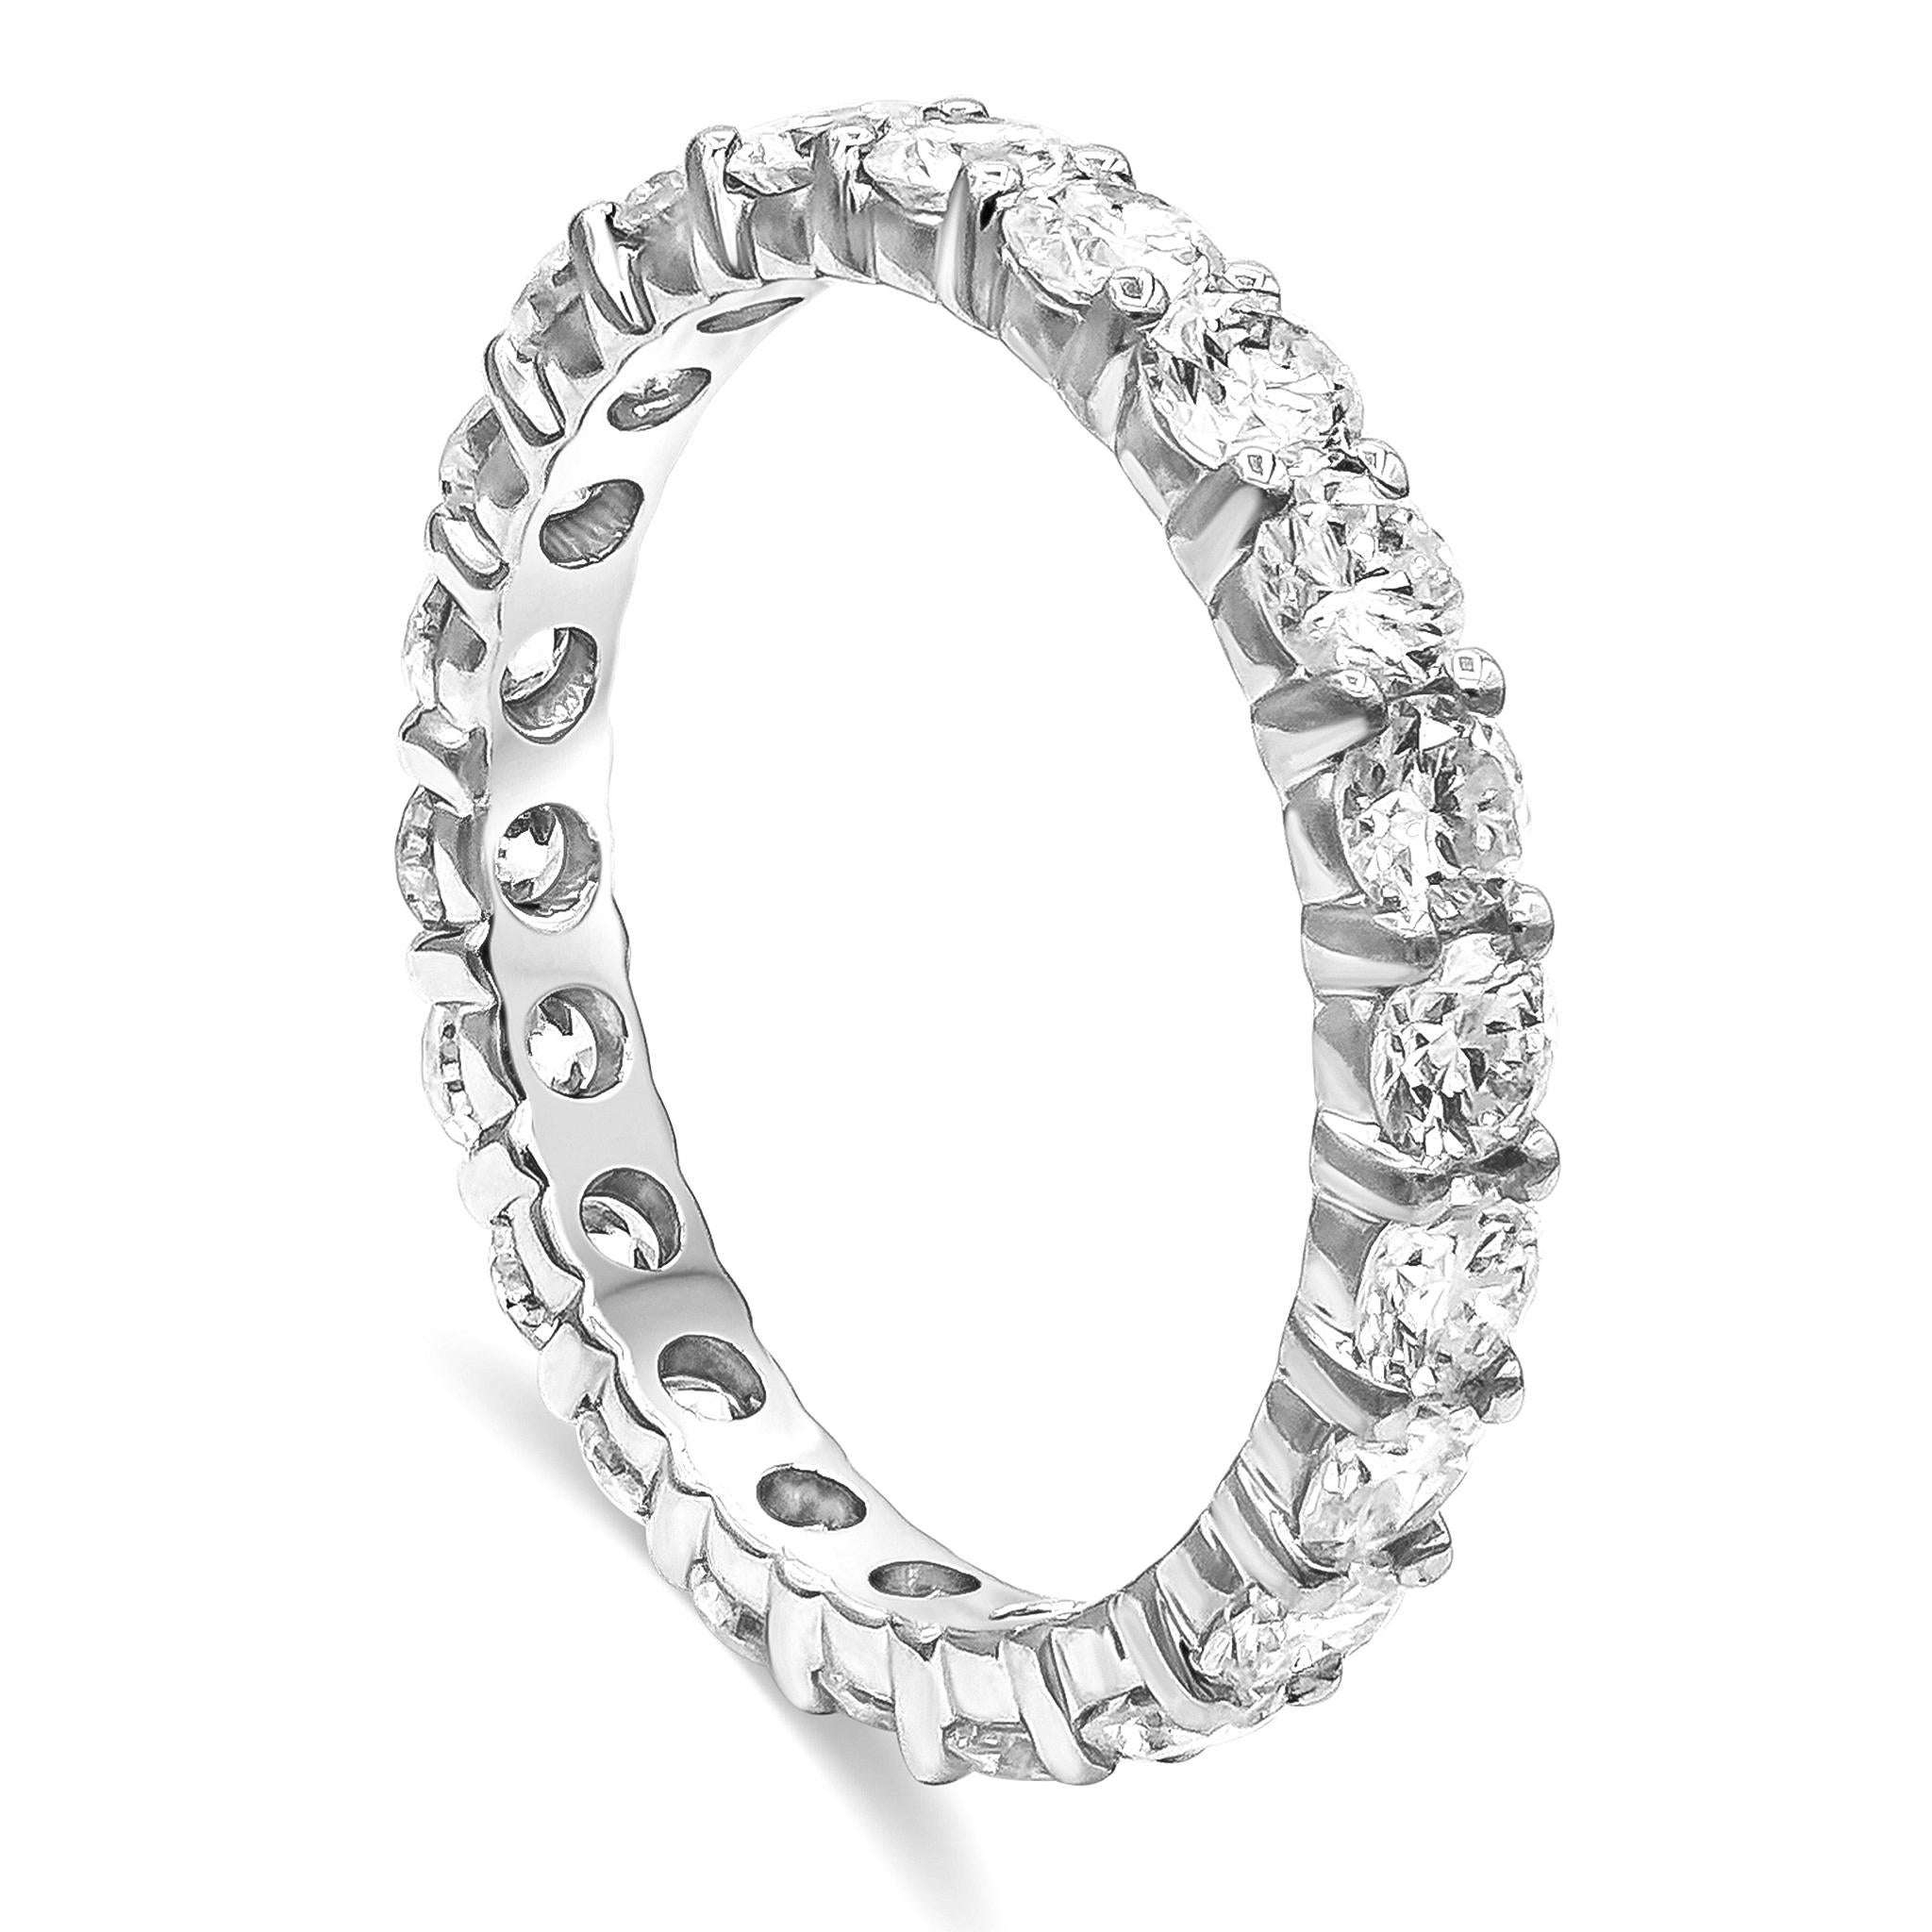 A classic eternity wedding band style showcasing a row of round brilliant diamonds weighing 1.92 carats total, G-H Color and VS in Clarity. Made with 18K White Gold. Size 6 US.

Roman Malakov is a custom house, specializing in creating anything you